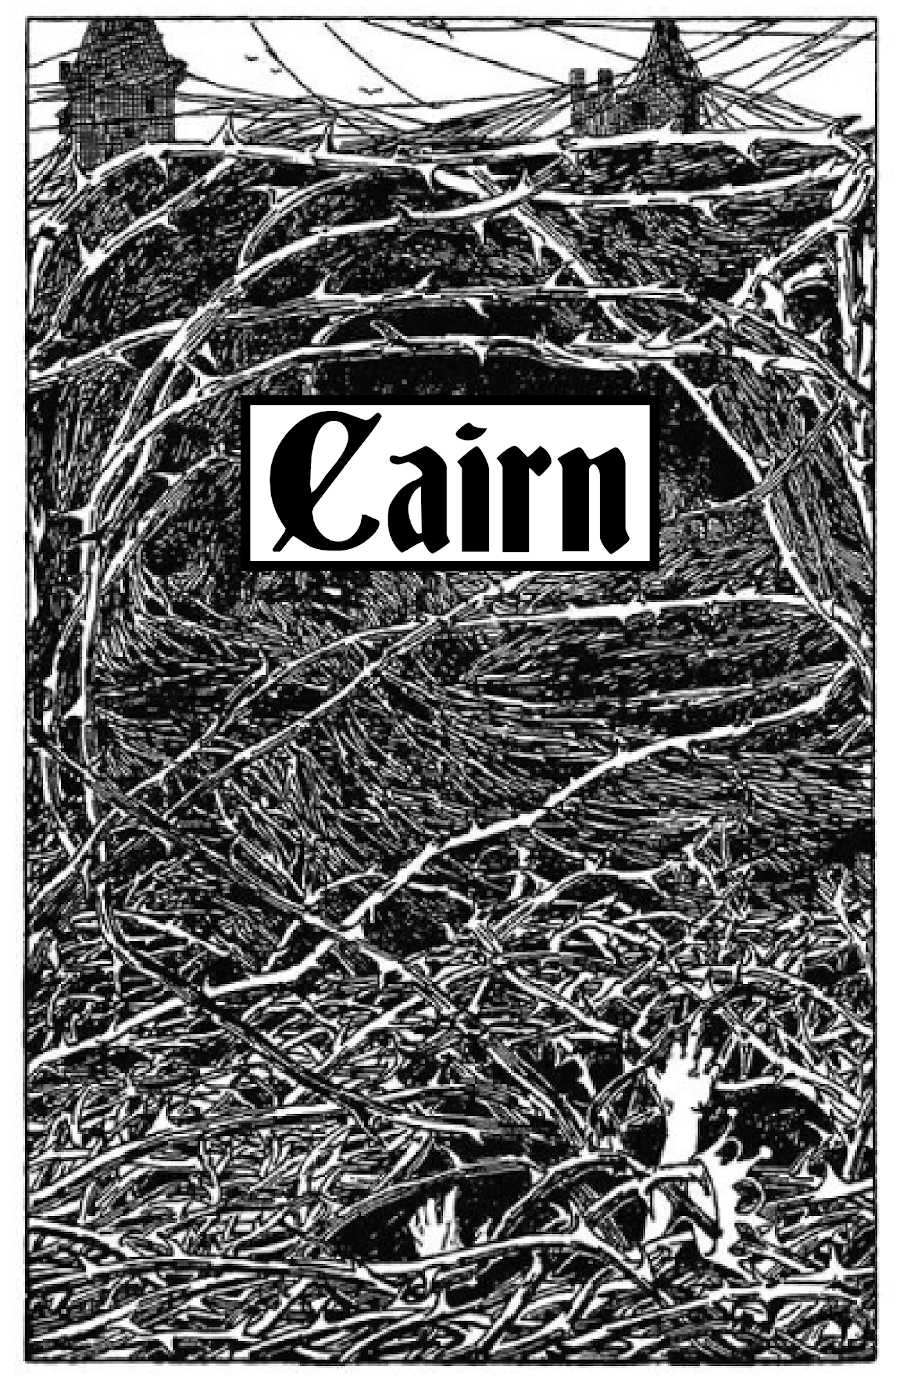 Cover art of Carin